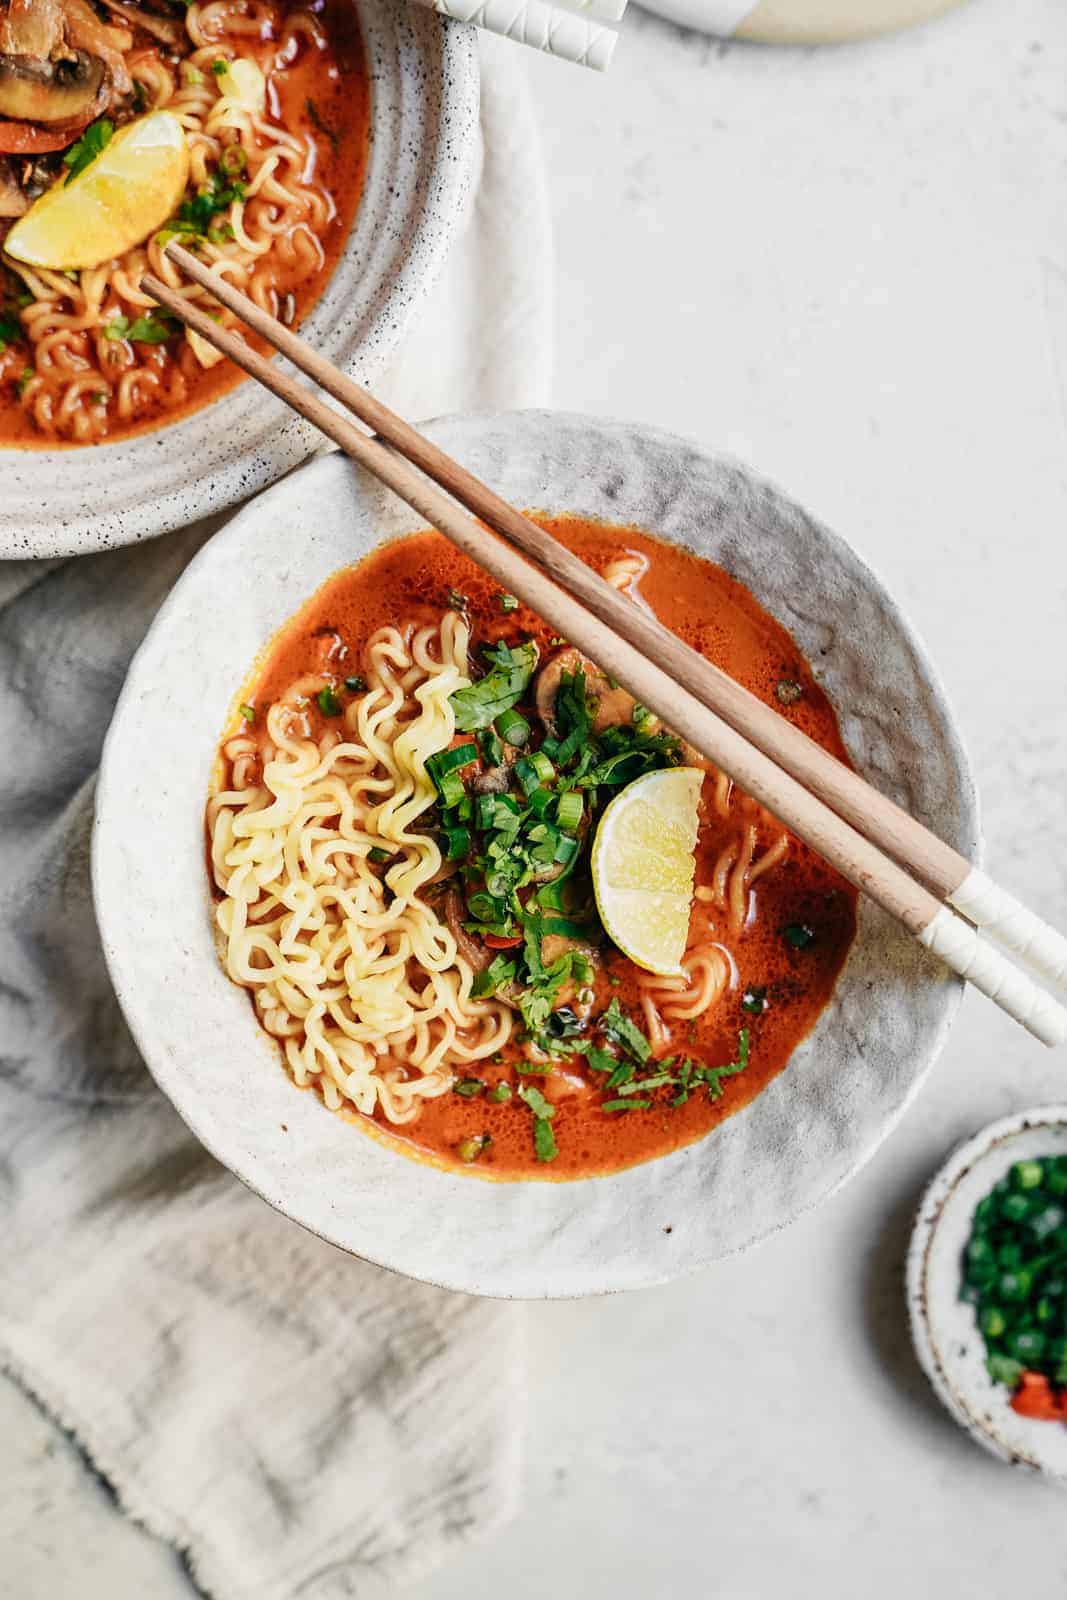 Easy Curry Vegetarian Ramen Recipe in serving bowls with chopsticks